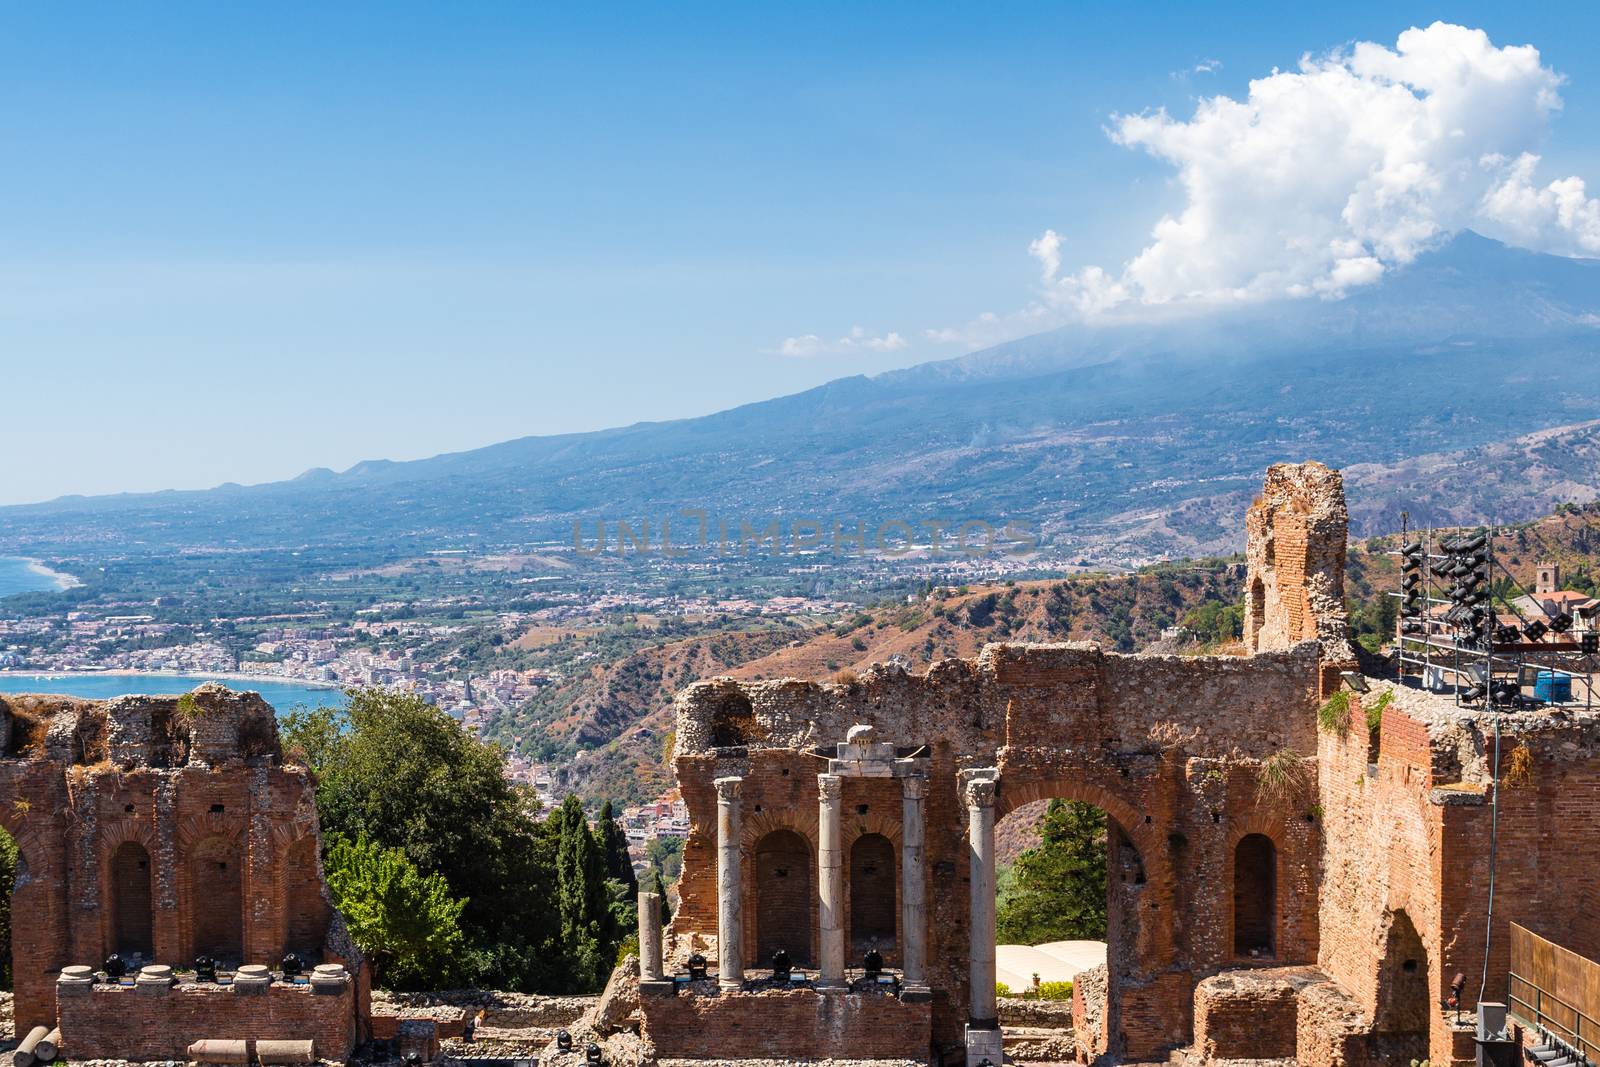 Greek theater in Taormina and Etna Mont view of volcano Etna in the background.